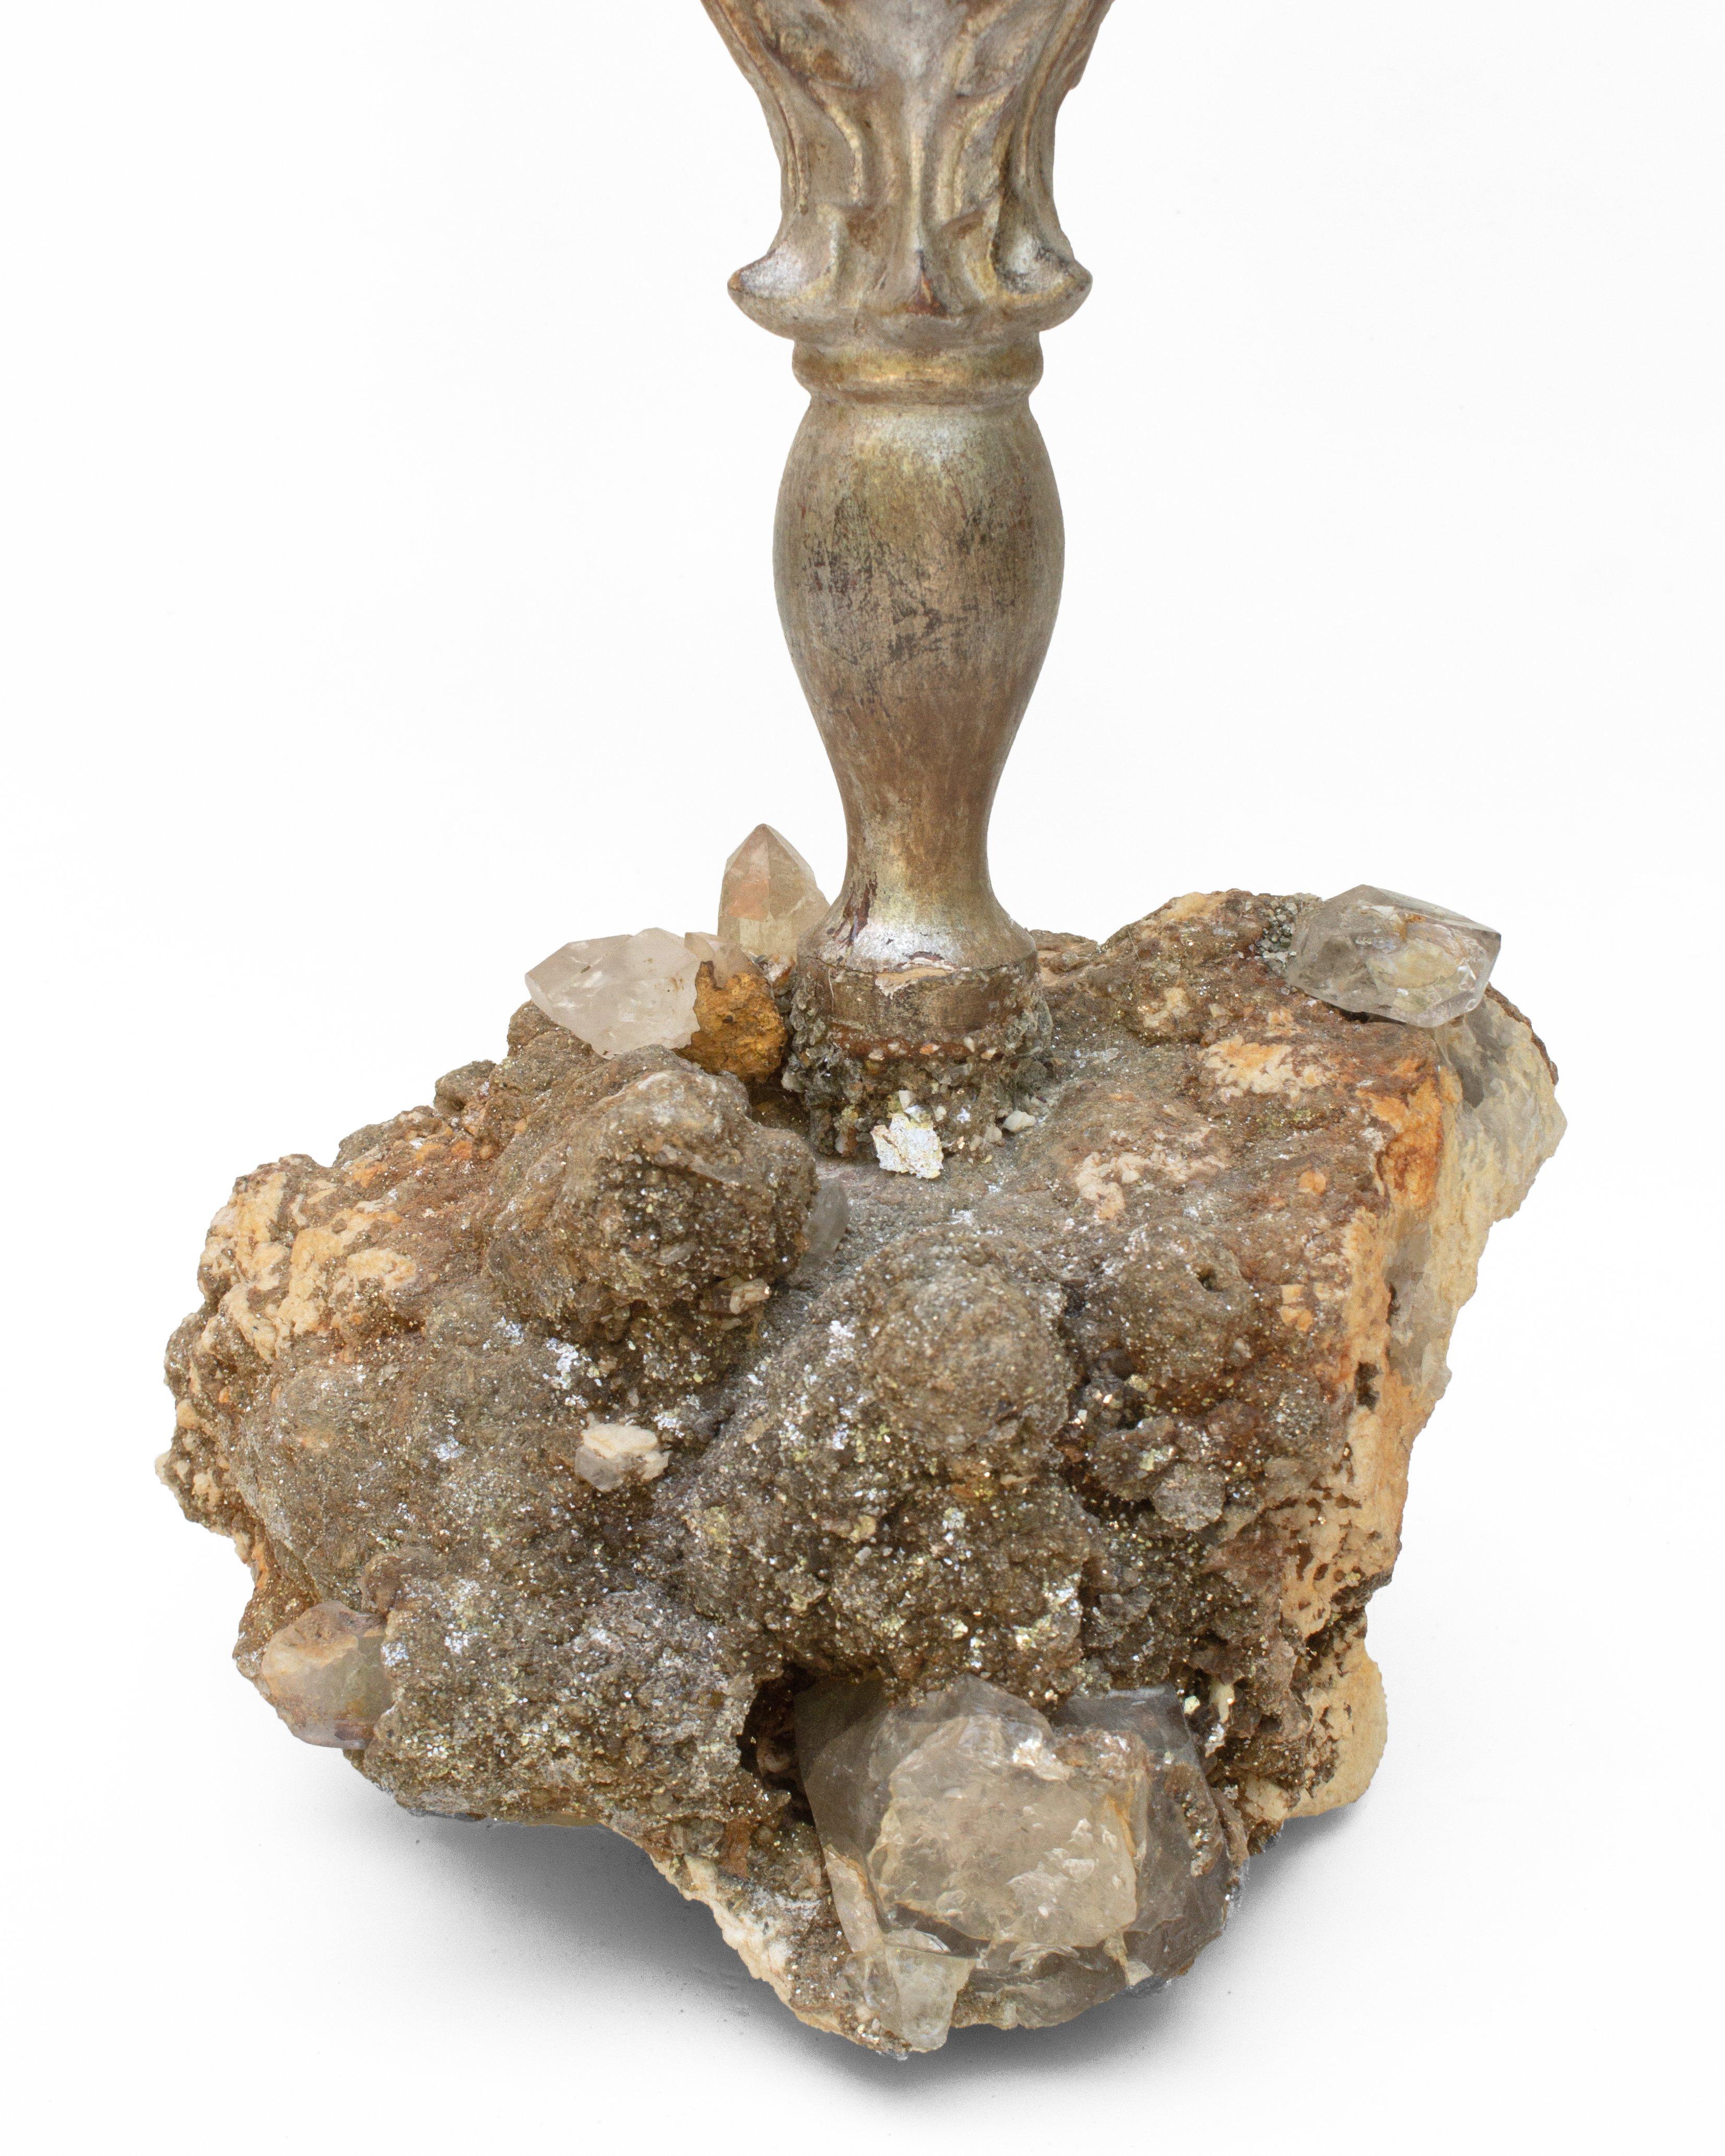 18th century Italian silver candlestick decorated with a Herkimer diamond with a mica foliage ruffle on a mica in calcite base with crystals.

The 18th century Italian silver candlestick is from Tuscany. It is mounted on the mica and calcite base